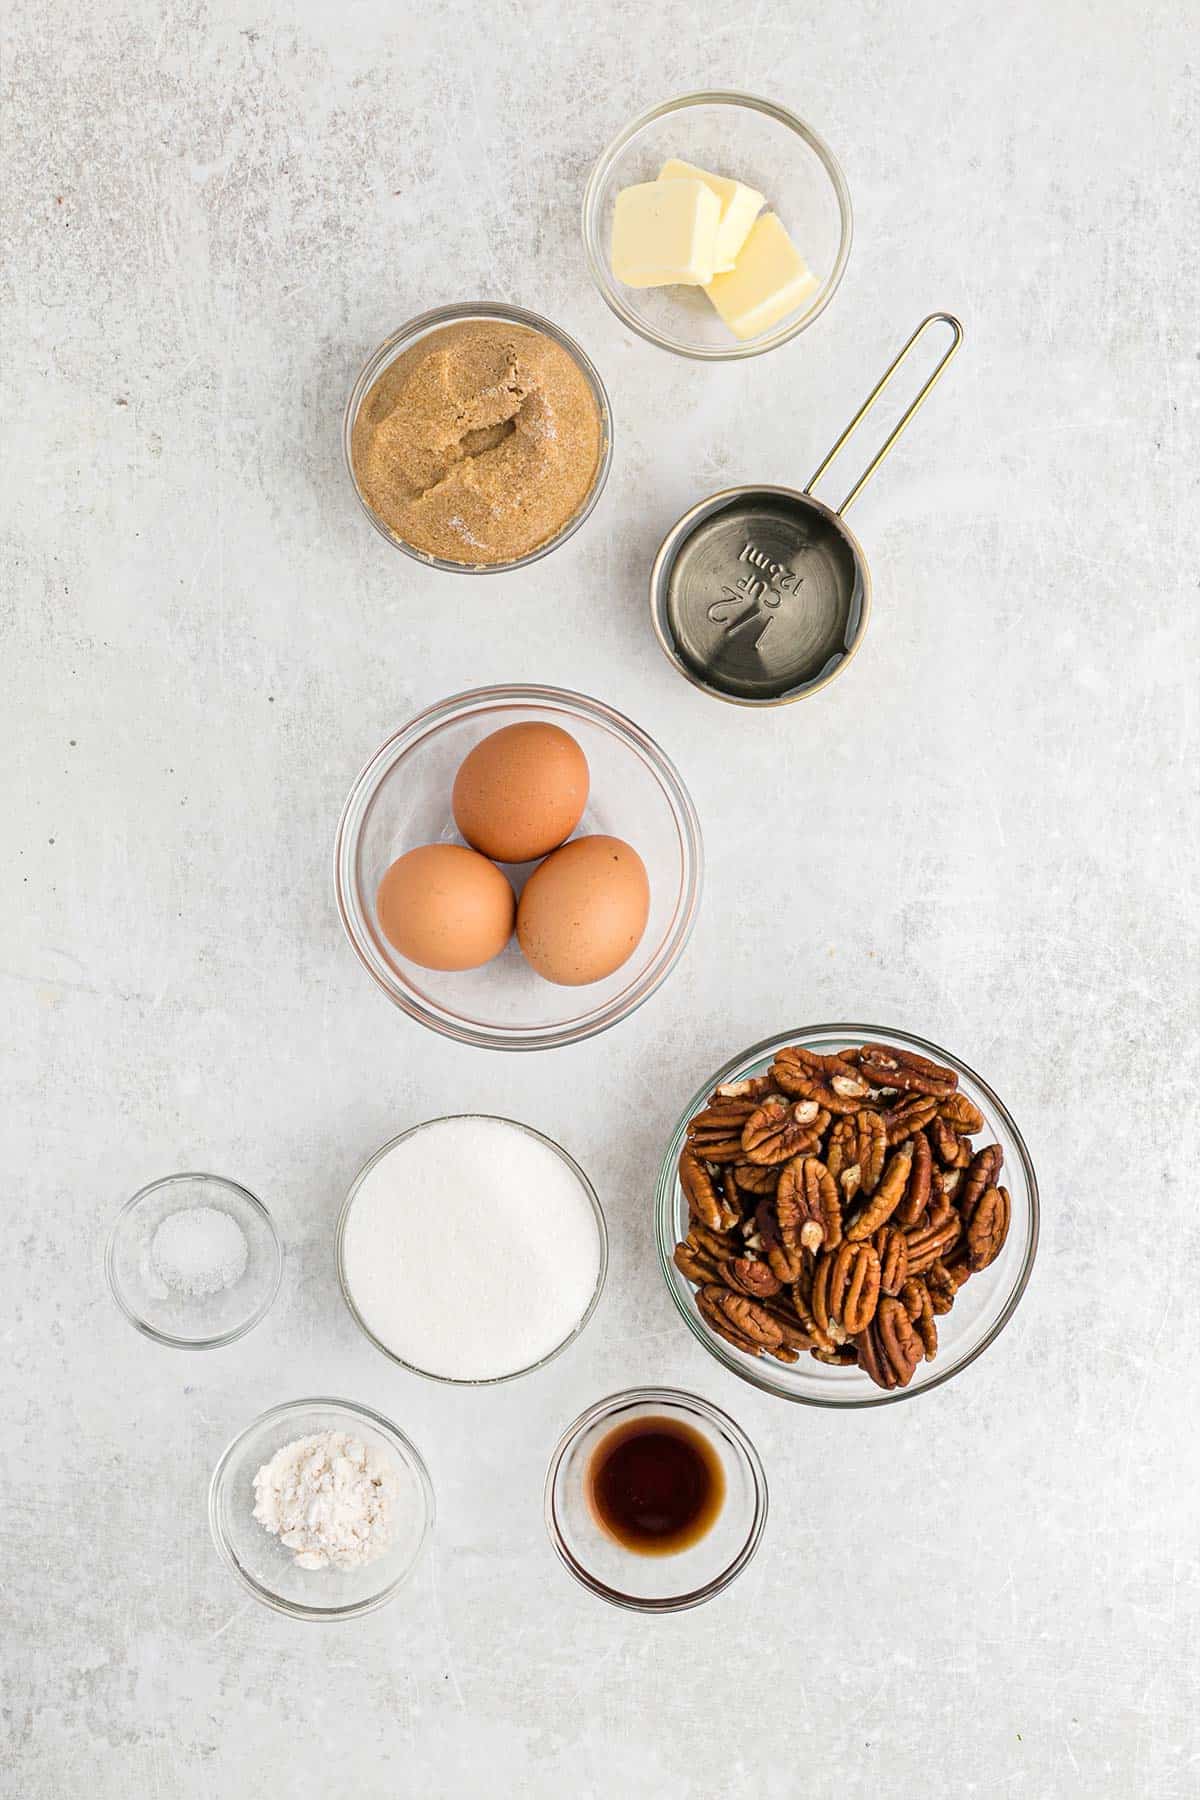 Ingredients to make pecan pie on the counter ready to mix up.